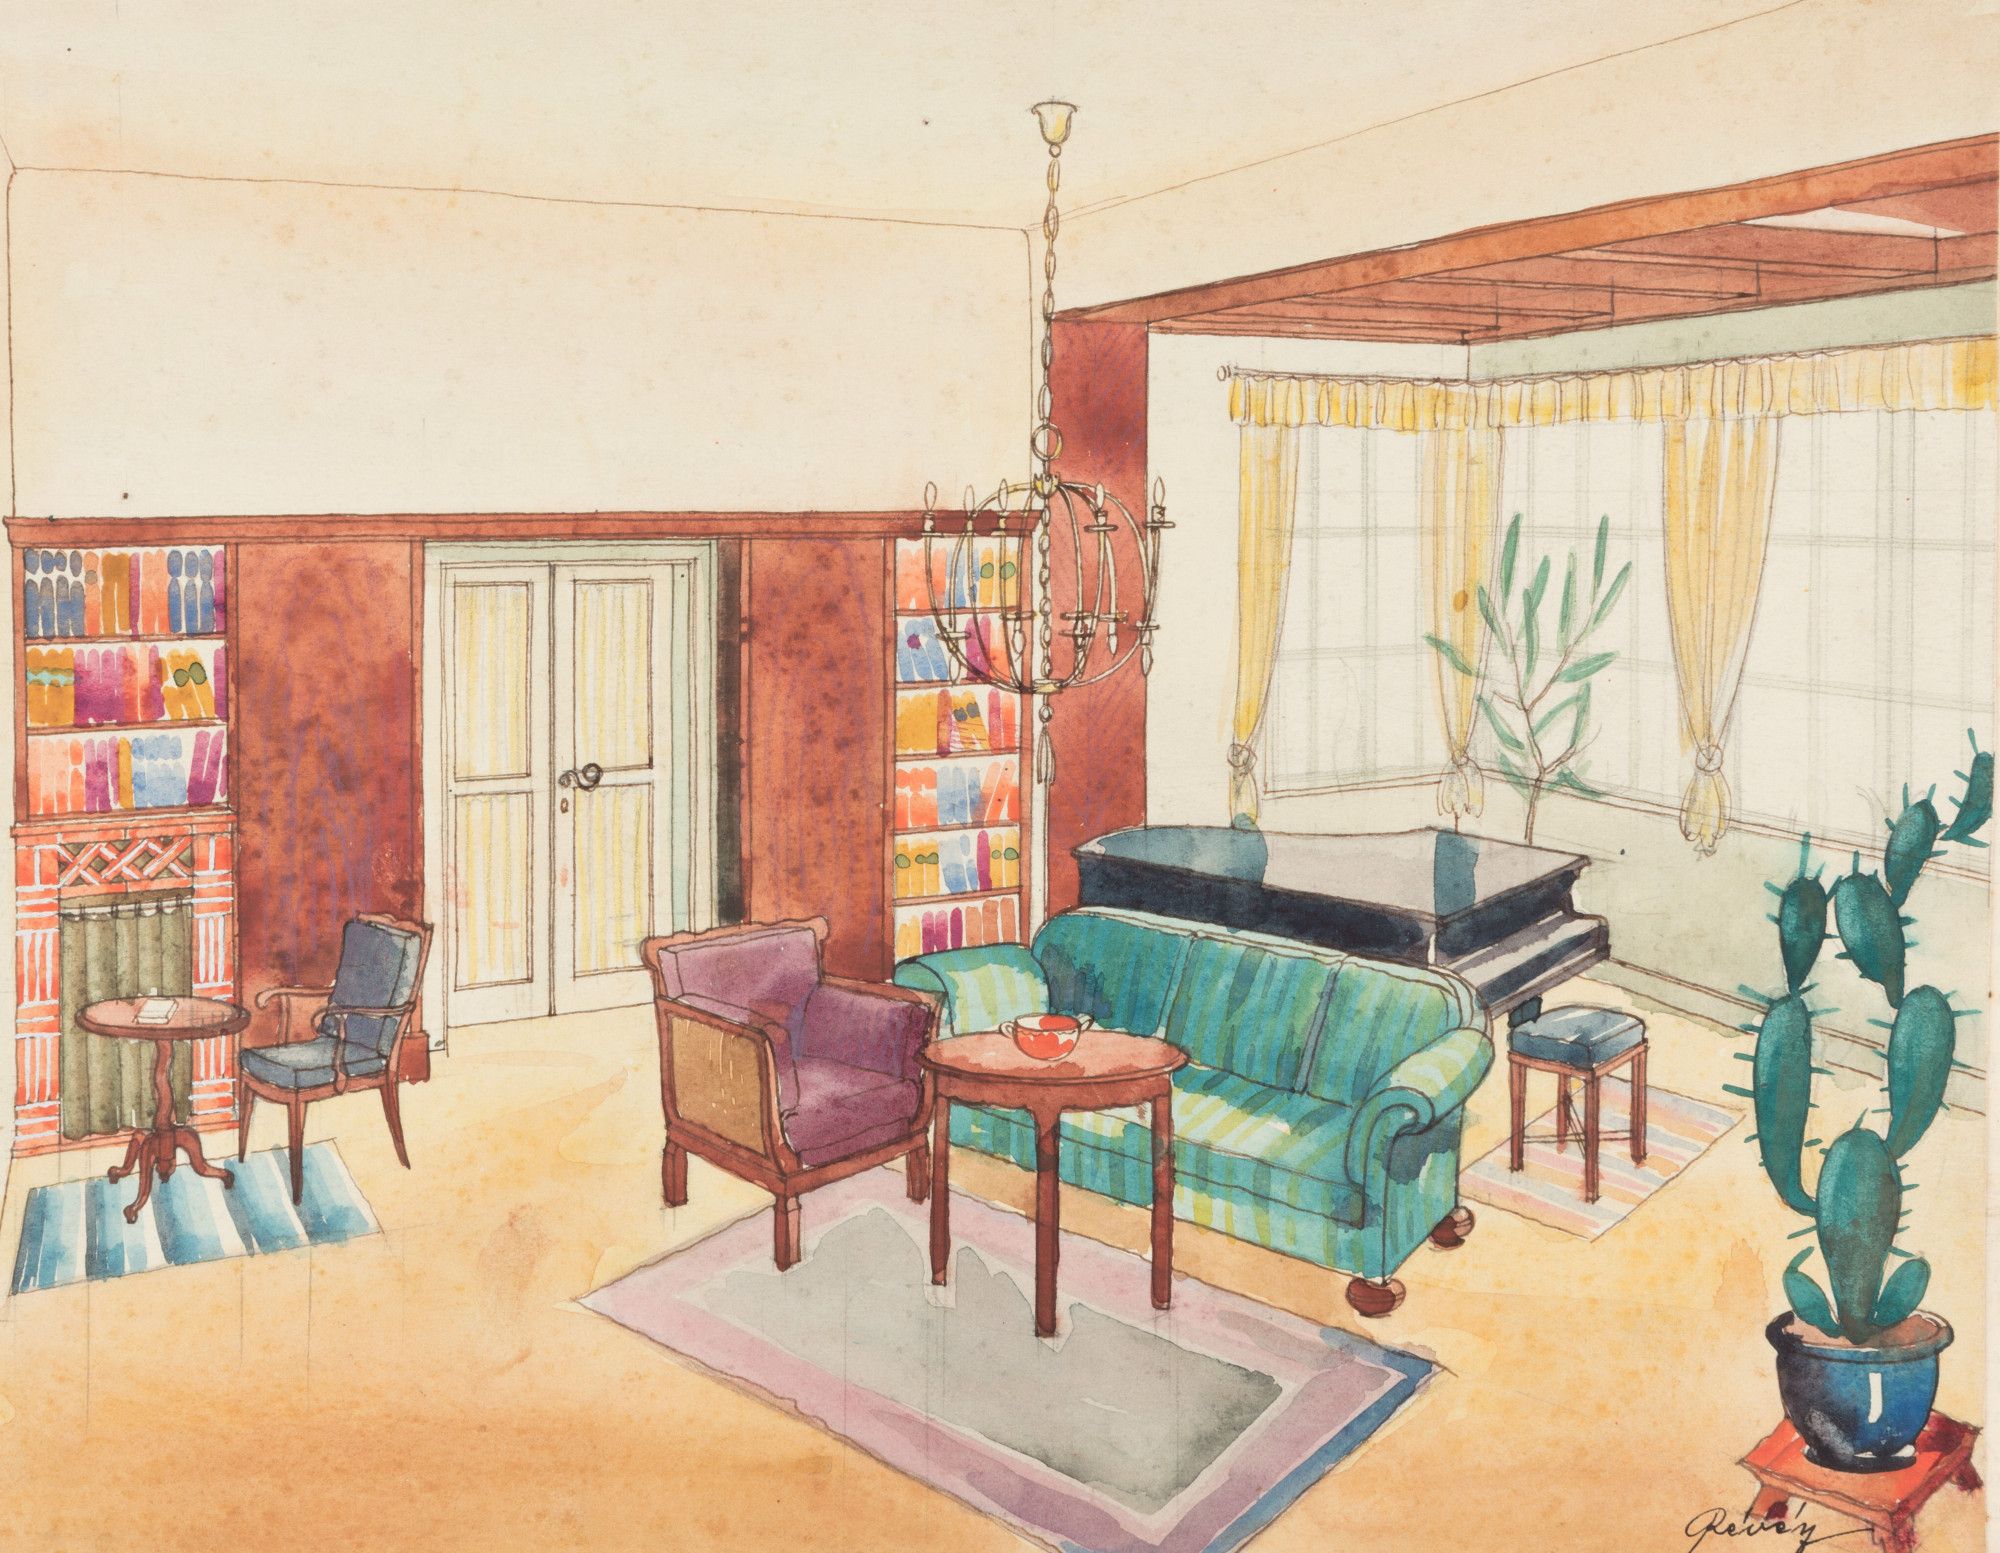 Colour sketch of a living room with lounge in the centre and a baby grand piano in front of a bay window